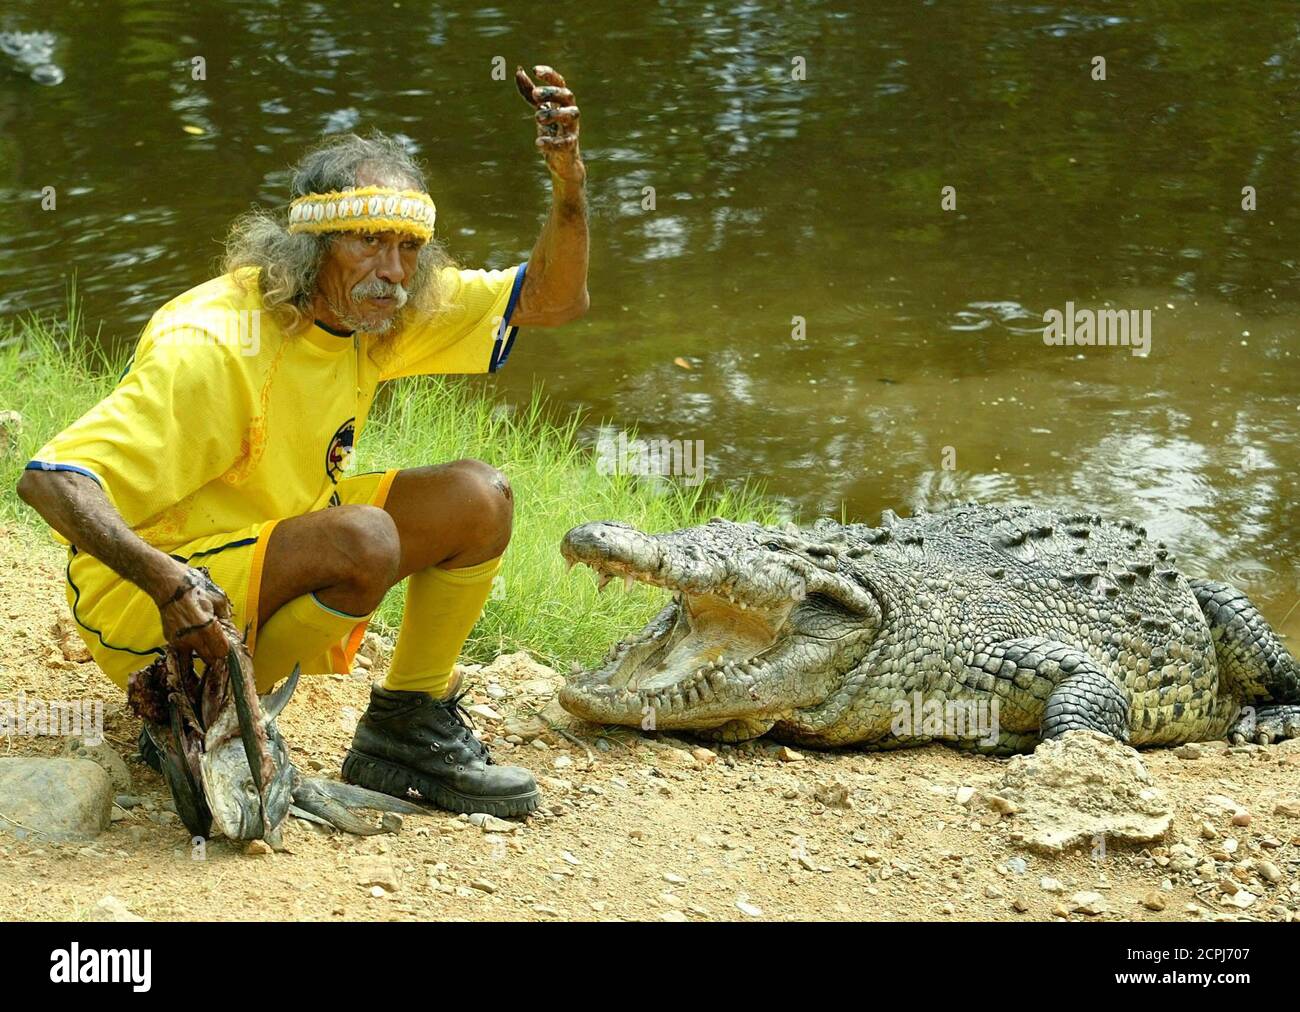 66 yr-old Mexican Eroberto Piza Rios, better known as 'Tamacun,' feeds a crocodile during a show in Playa Linda Ixtapa in the Mexican State of Guerrero in this photo taken August 1, 2003. Tamacun has rised and trained at least 47 crocodiles which grow up to five meters in length. Tamacun wears the yellow jersey of his favorite mexican soccer team 'America' and also names his crocodiles after former players. REUTERS/Daniel Aguilar TO MATCH FEATURE STORY MEXICO-CROCODILES  DA Stock Photo